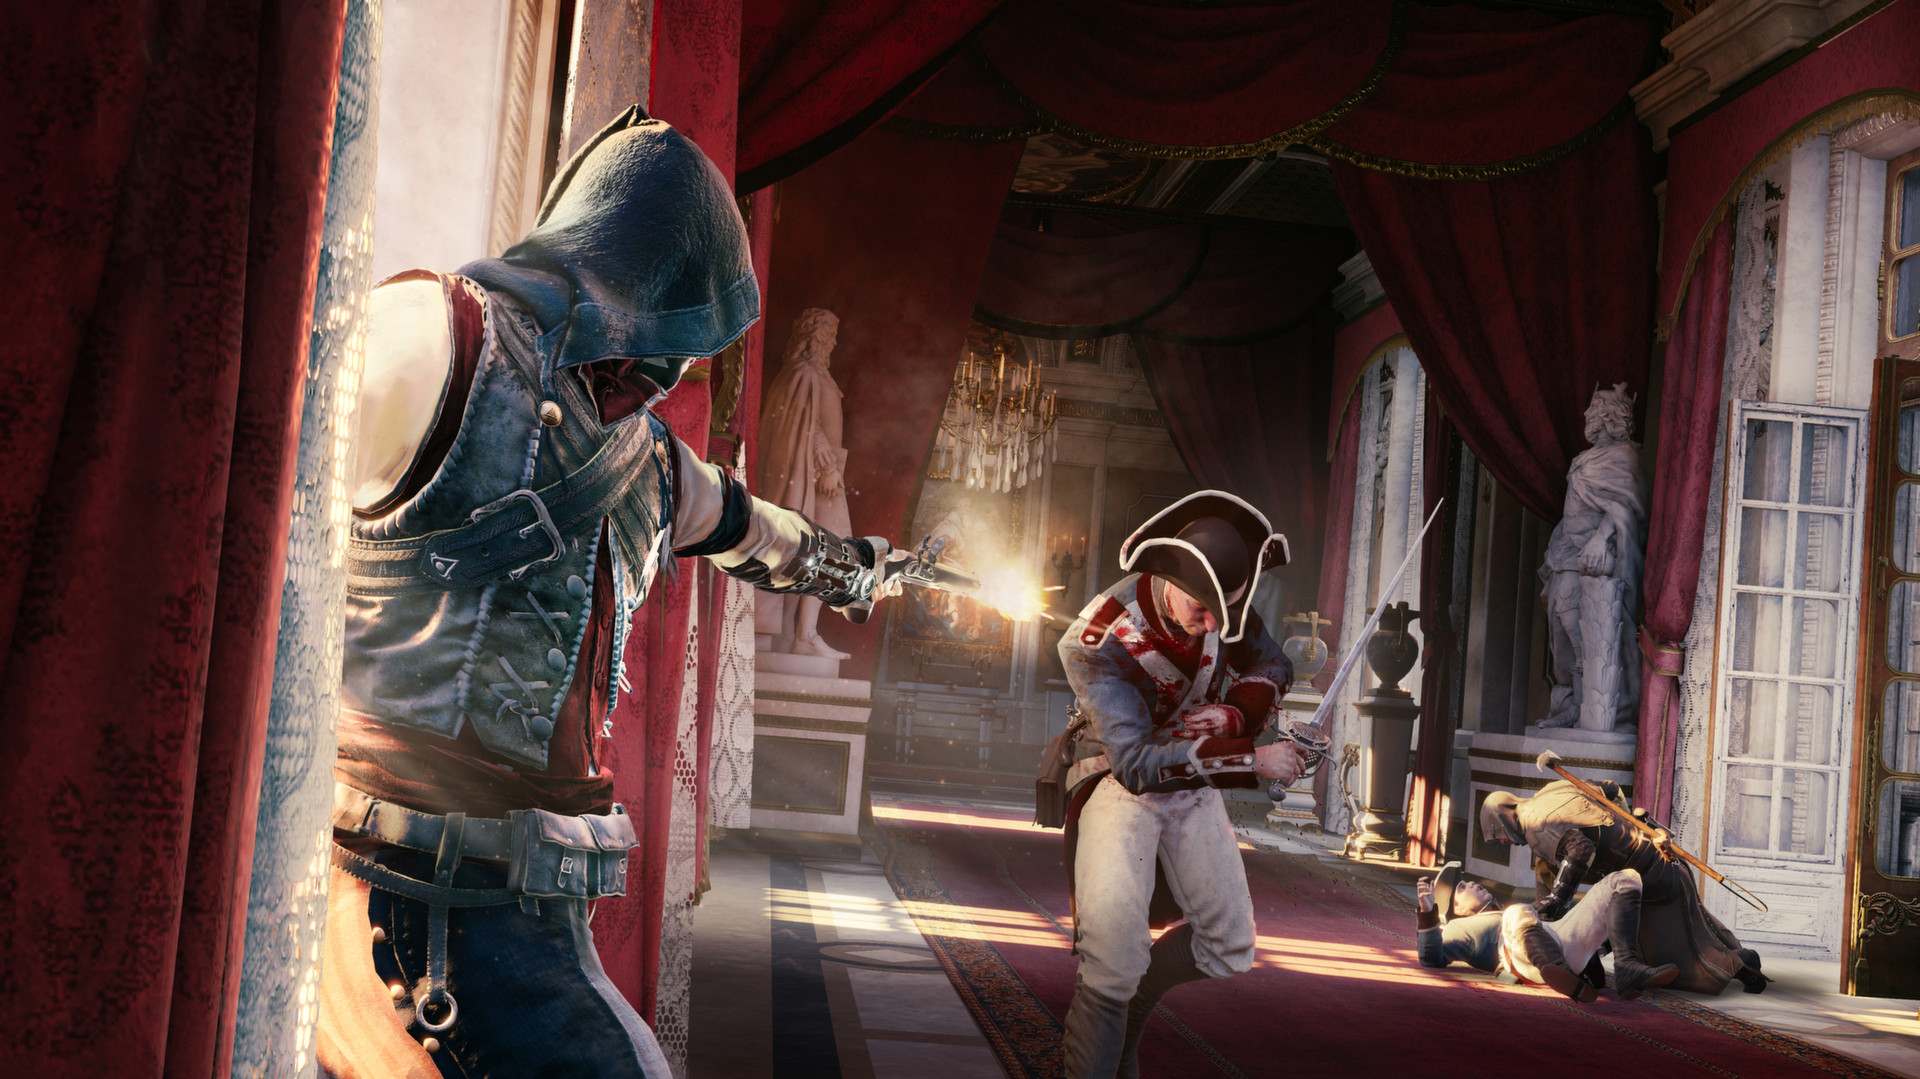 New Assassin's Creed: Unity Gameplay Trailer  Assassins creed unity, Assassin's  creed, Assassins creed series